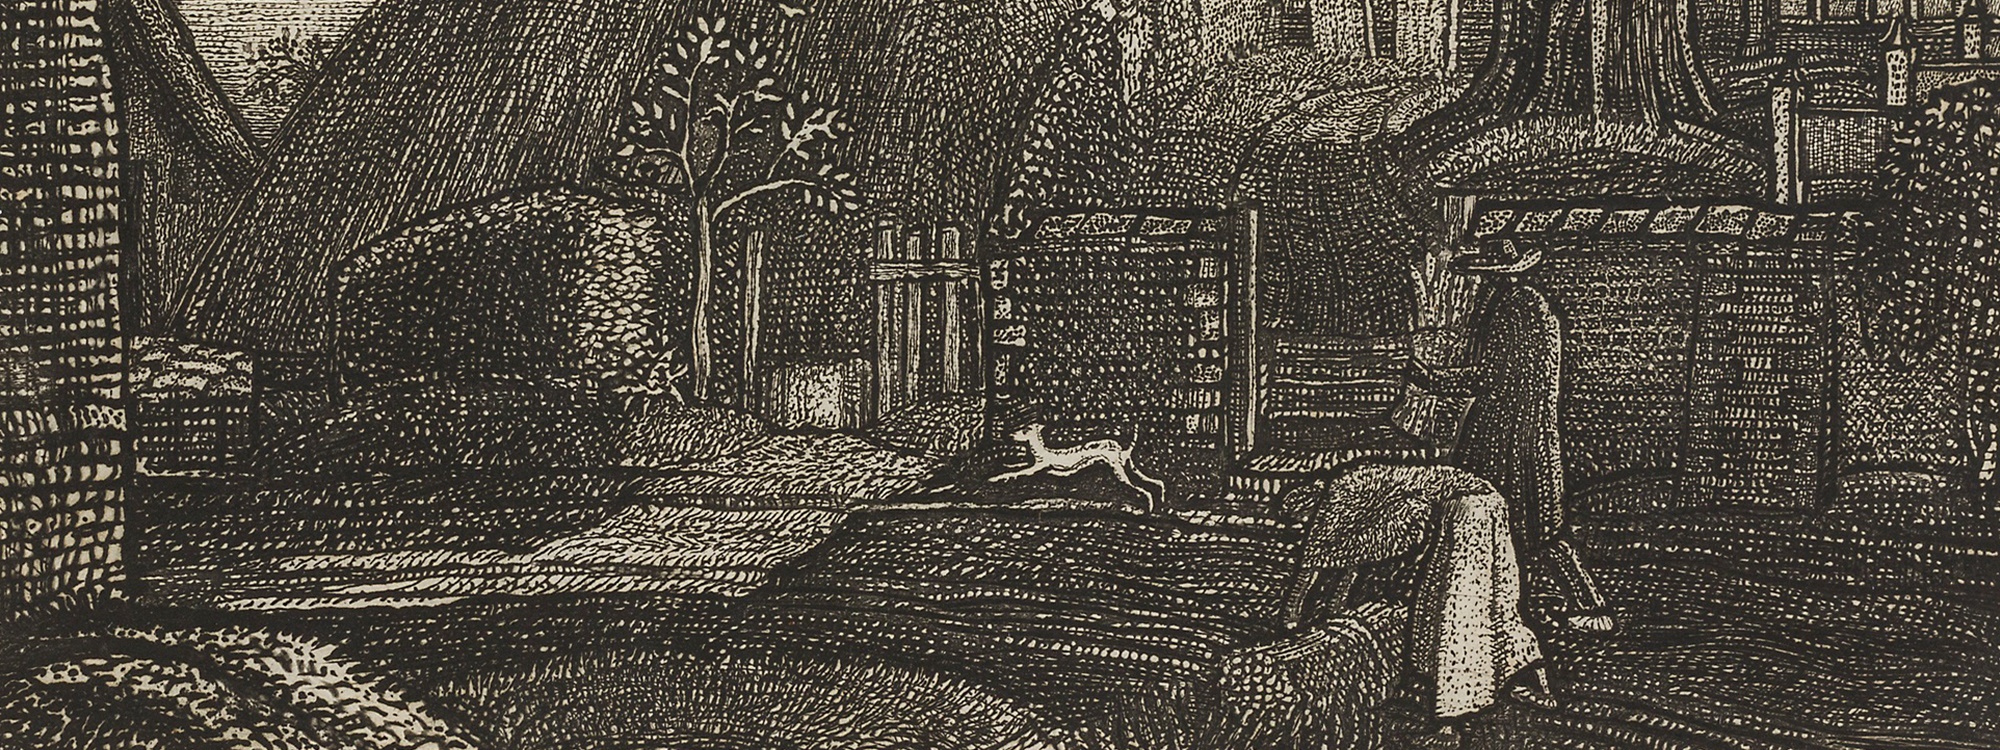 The Early Etchings of Graham Sutherland